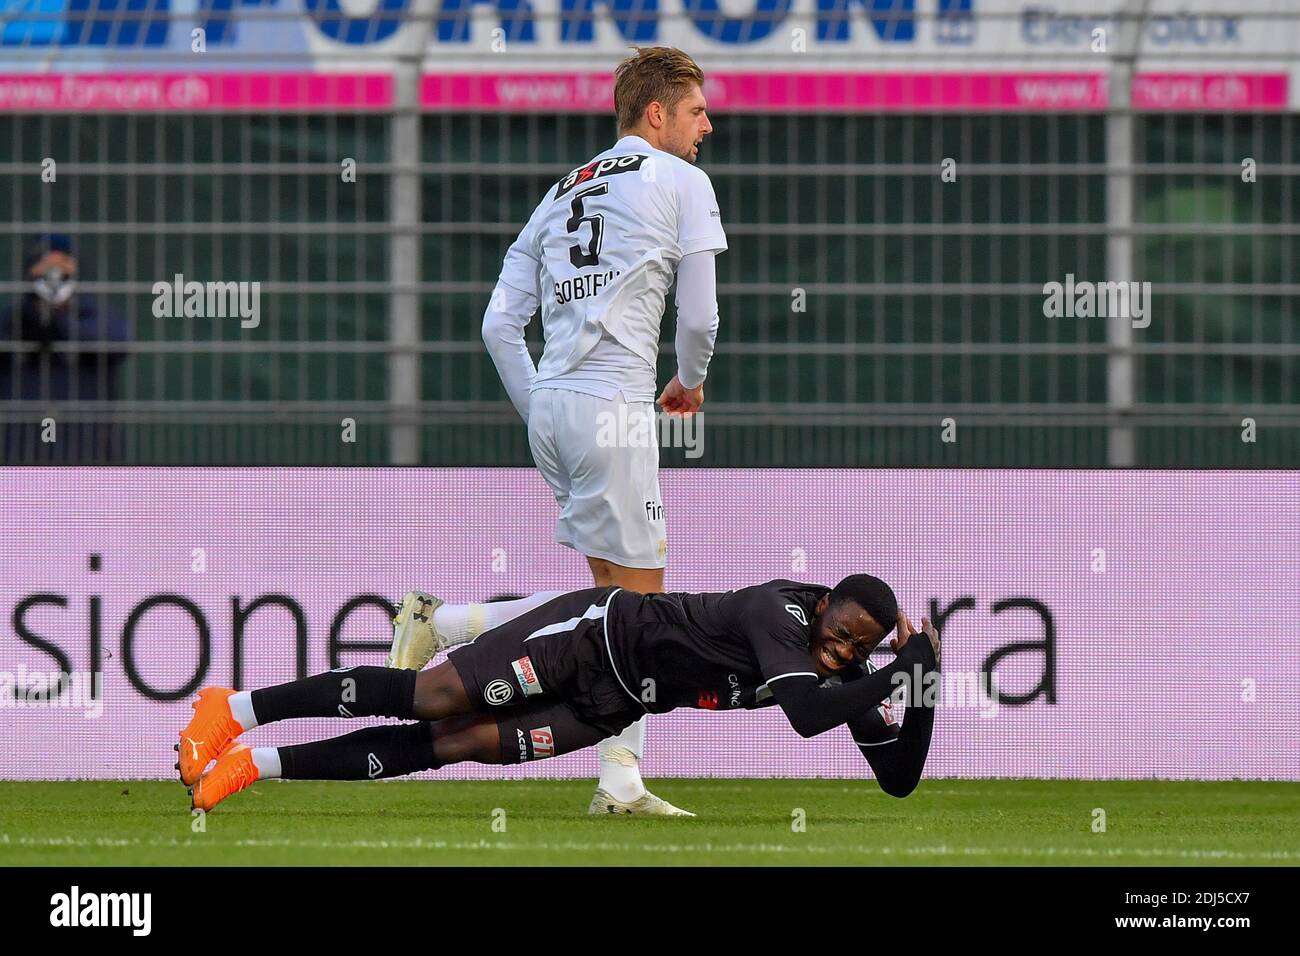 Lugano, Switzerland. 13th Dec, 2020. Lasse Sobiech (#5 Zurich) and Cristopher Lungoyi (#8 FC Lugano) in action during the Swiss Super League match between FC Lugano and FC Zürich Cristiano Mazzi/SPP Credit: SPP Sport Press Photo. /Alamy Live News Stock Photo